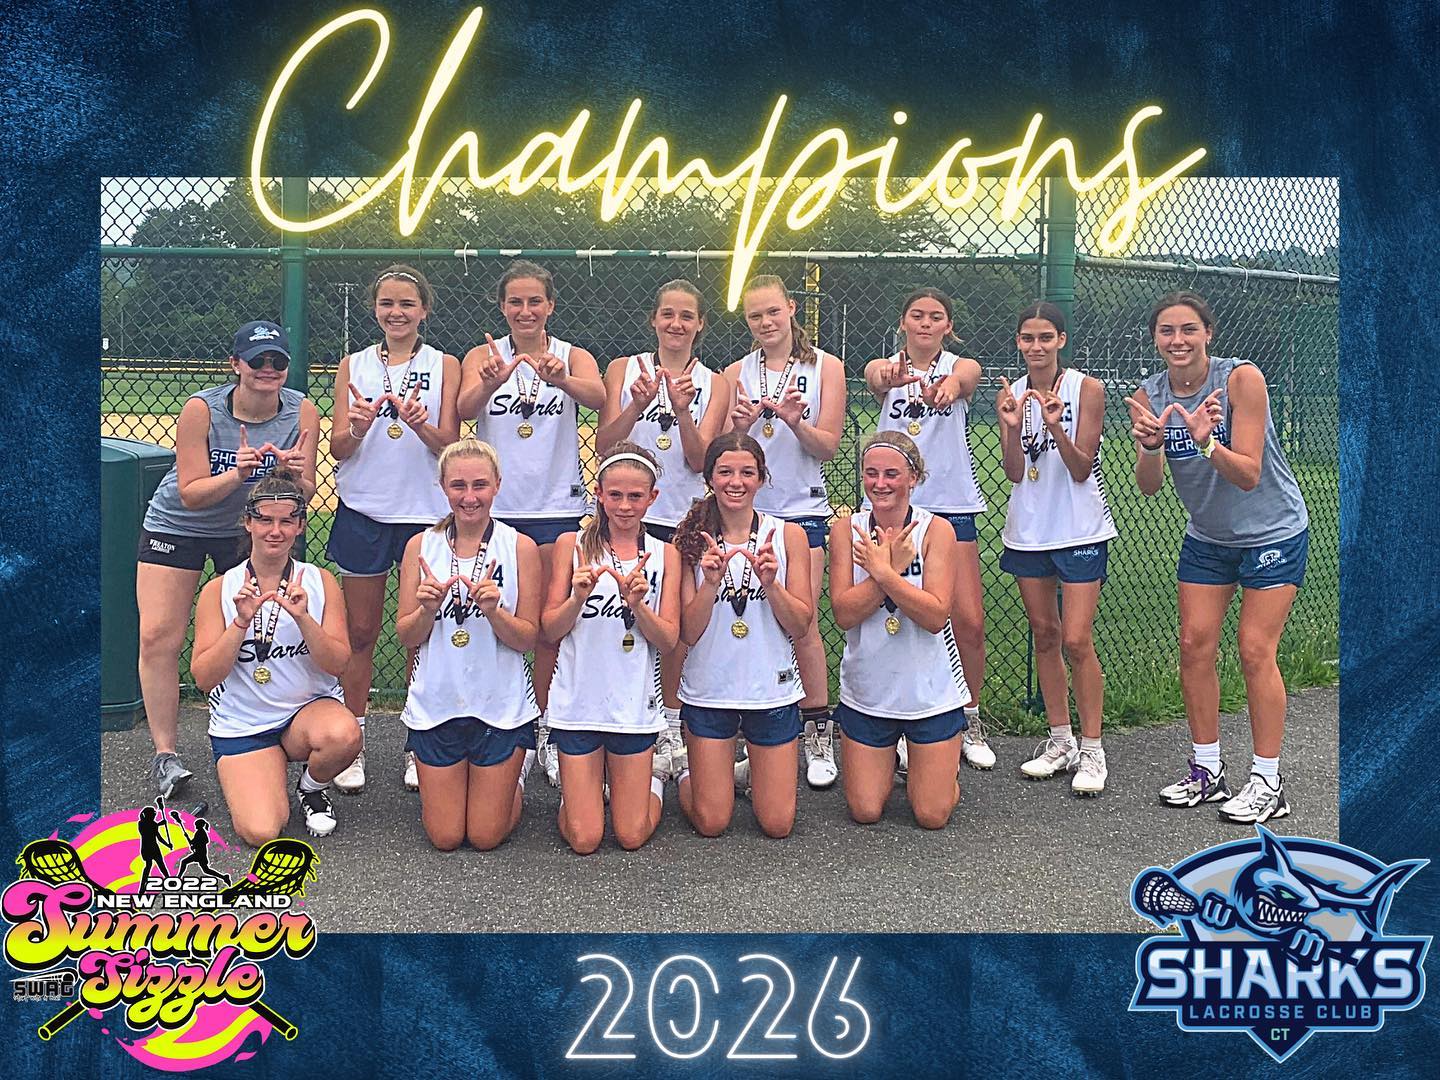 Congratulations to our girls 2026 team on winning their second division championship of the summer! They took home the crown today at the NE Summer Sizzle! 

🦈🥍🥇